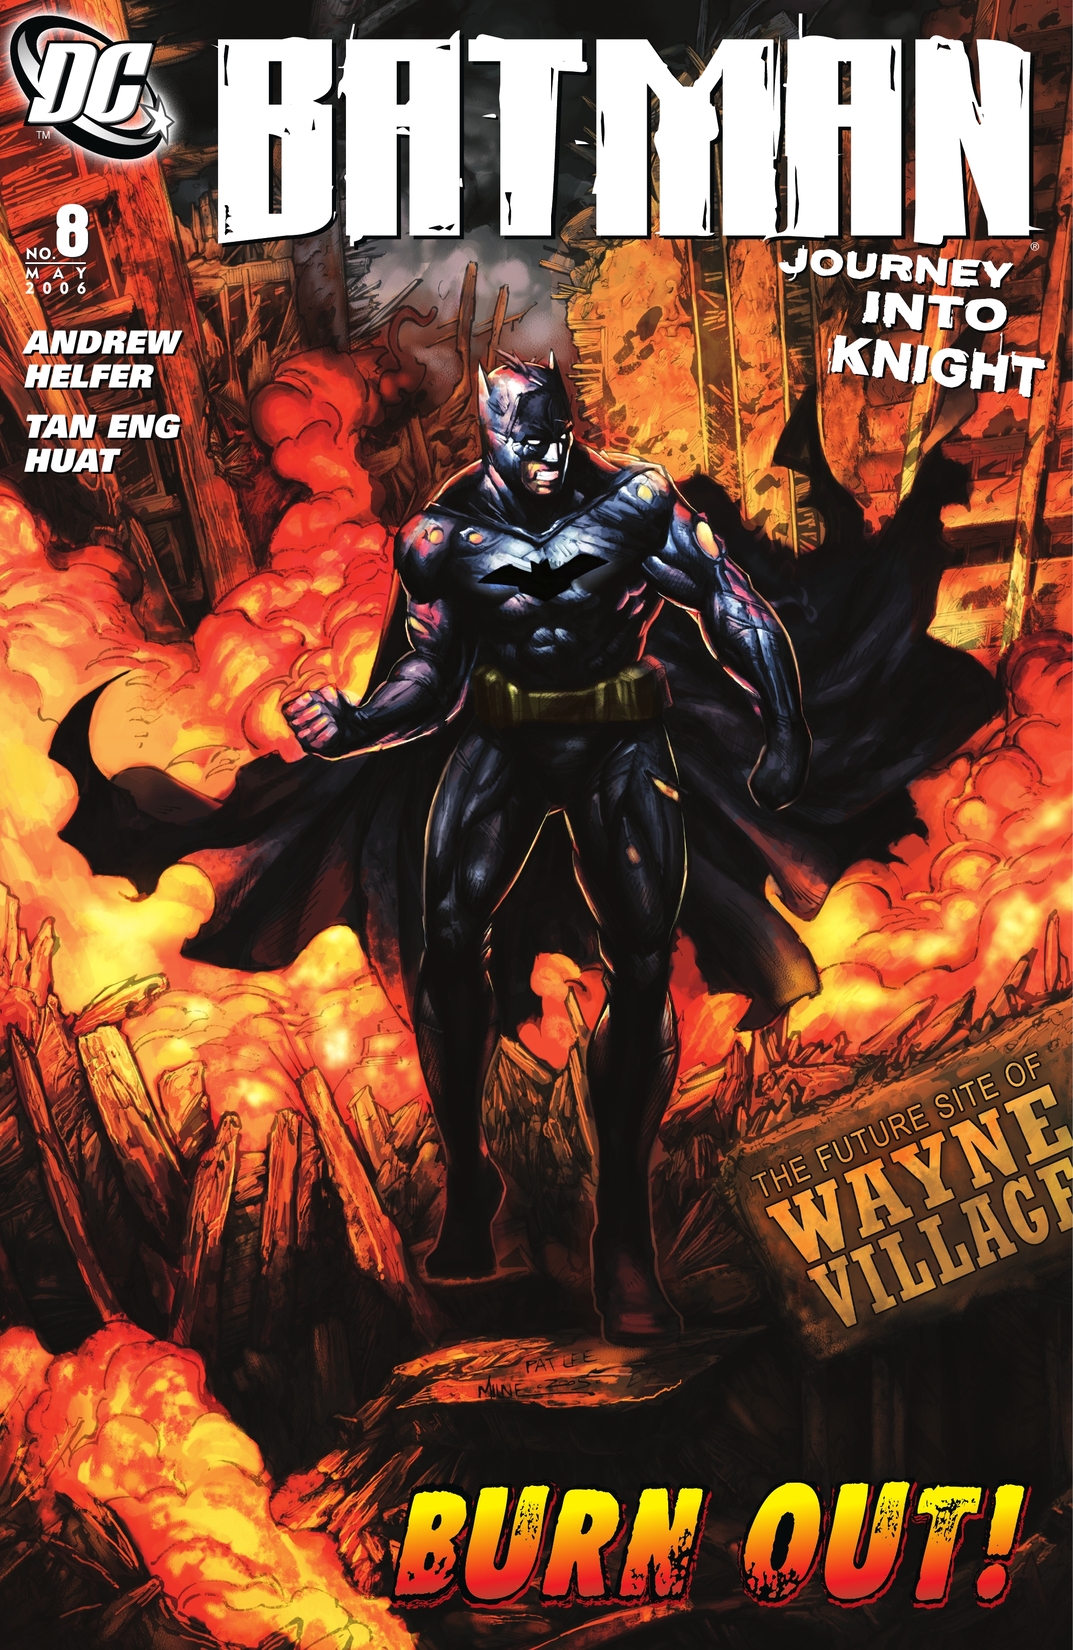 Batman: Journey into Knight #8 preview images